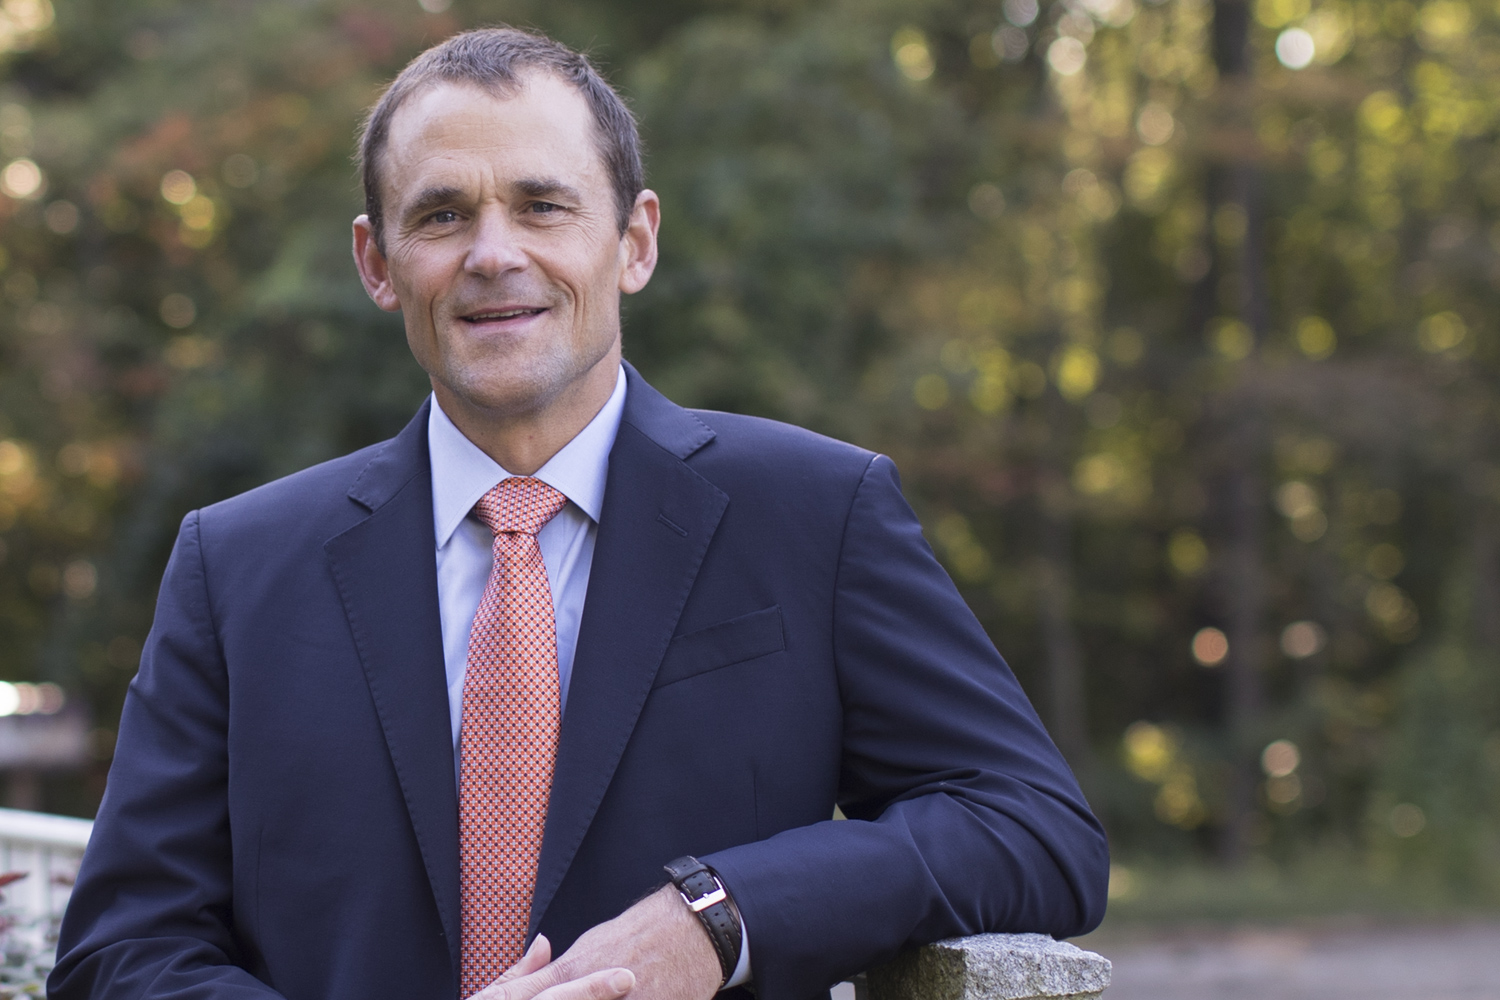 UVA President-Elect James Ryan will talk about his book, “Wait, What? And Life’s Other Essential Questions,” on March 24. (Photo by Sanjay Suchak, University Communications)